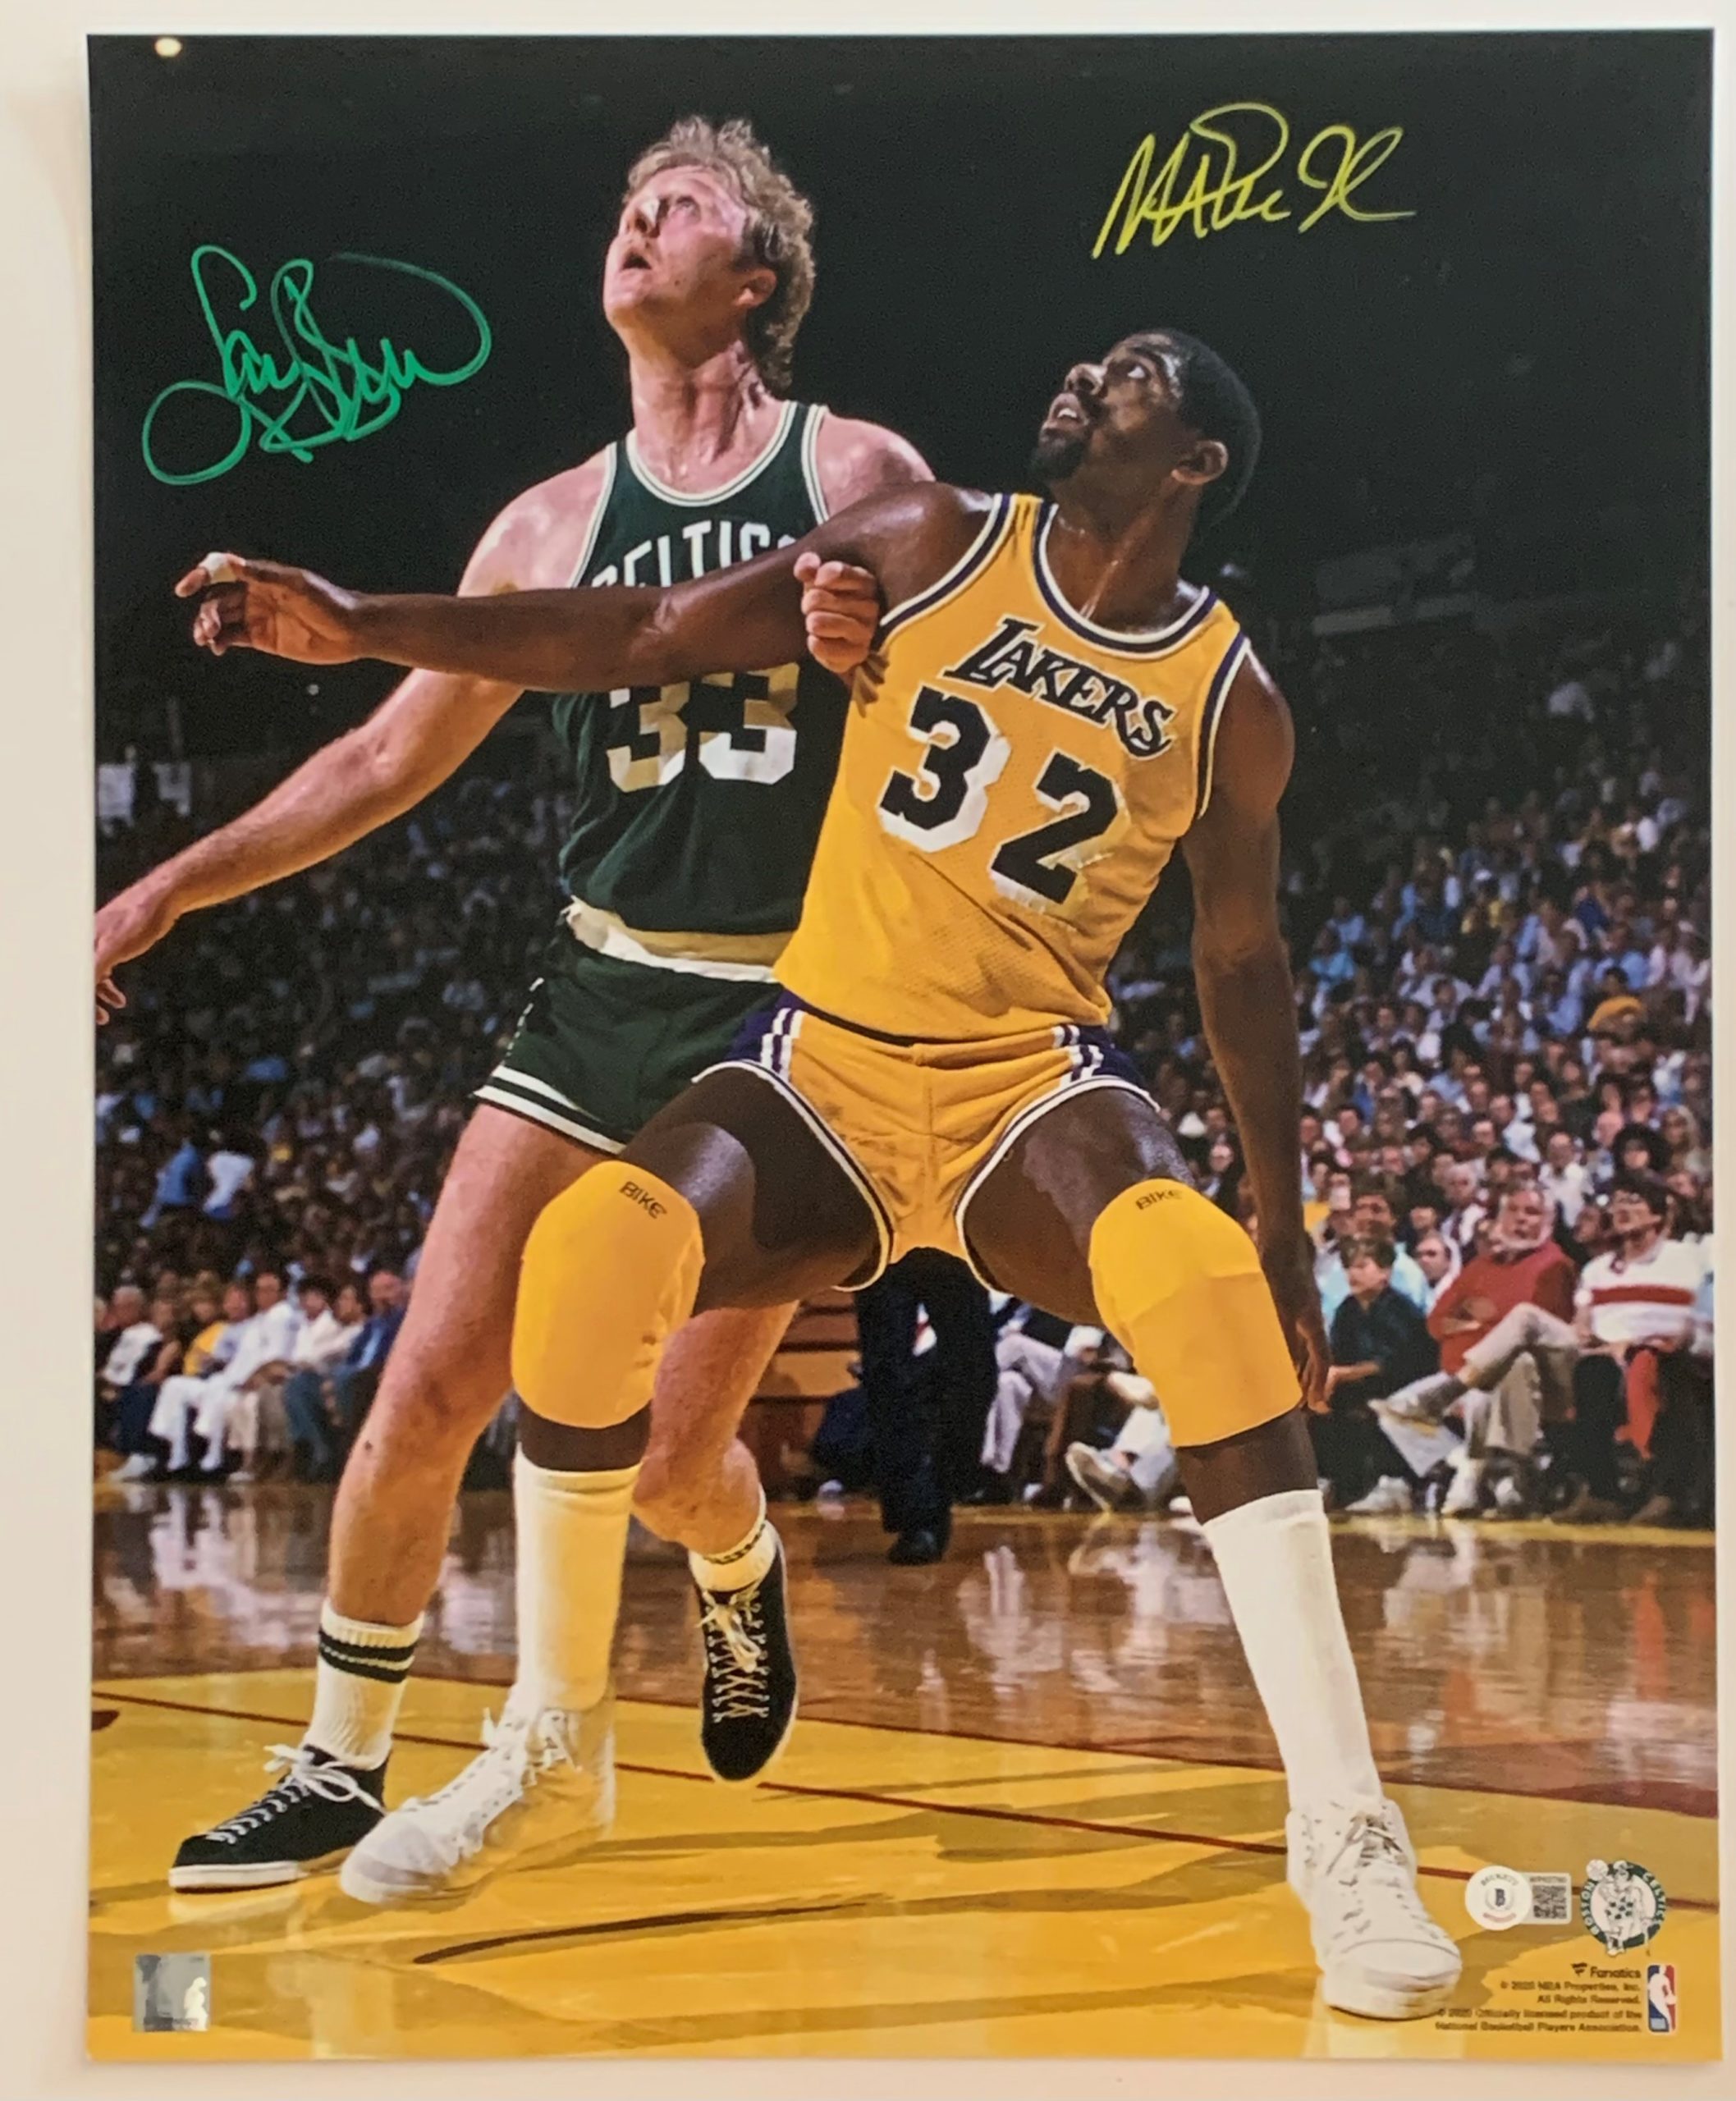 Magic Johnson & Larry bird Signed Unframed 16x20 Photo - with trophy –  Super Sports Center